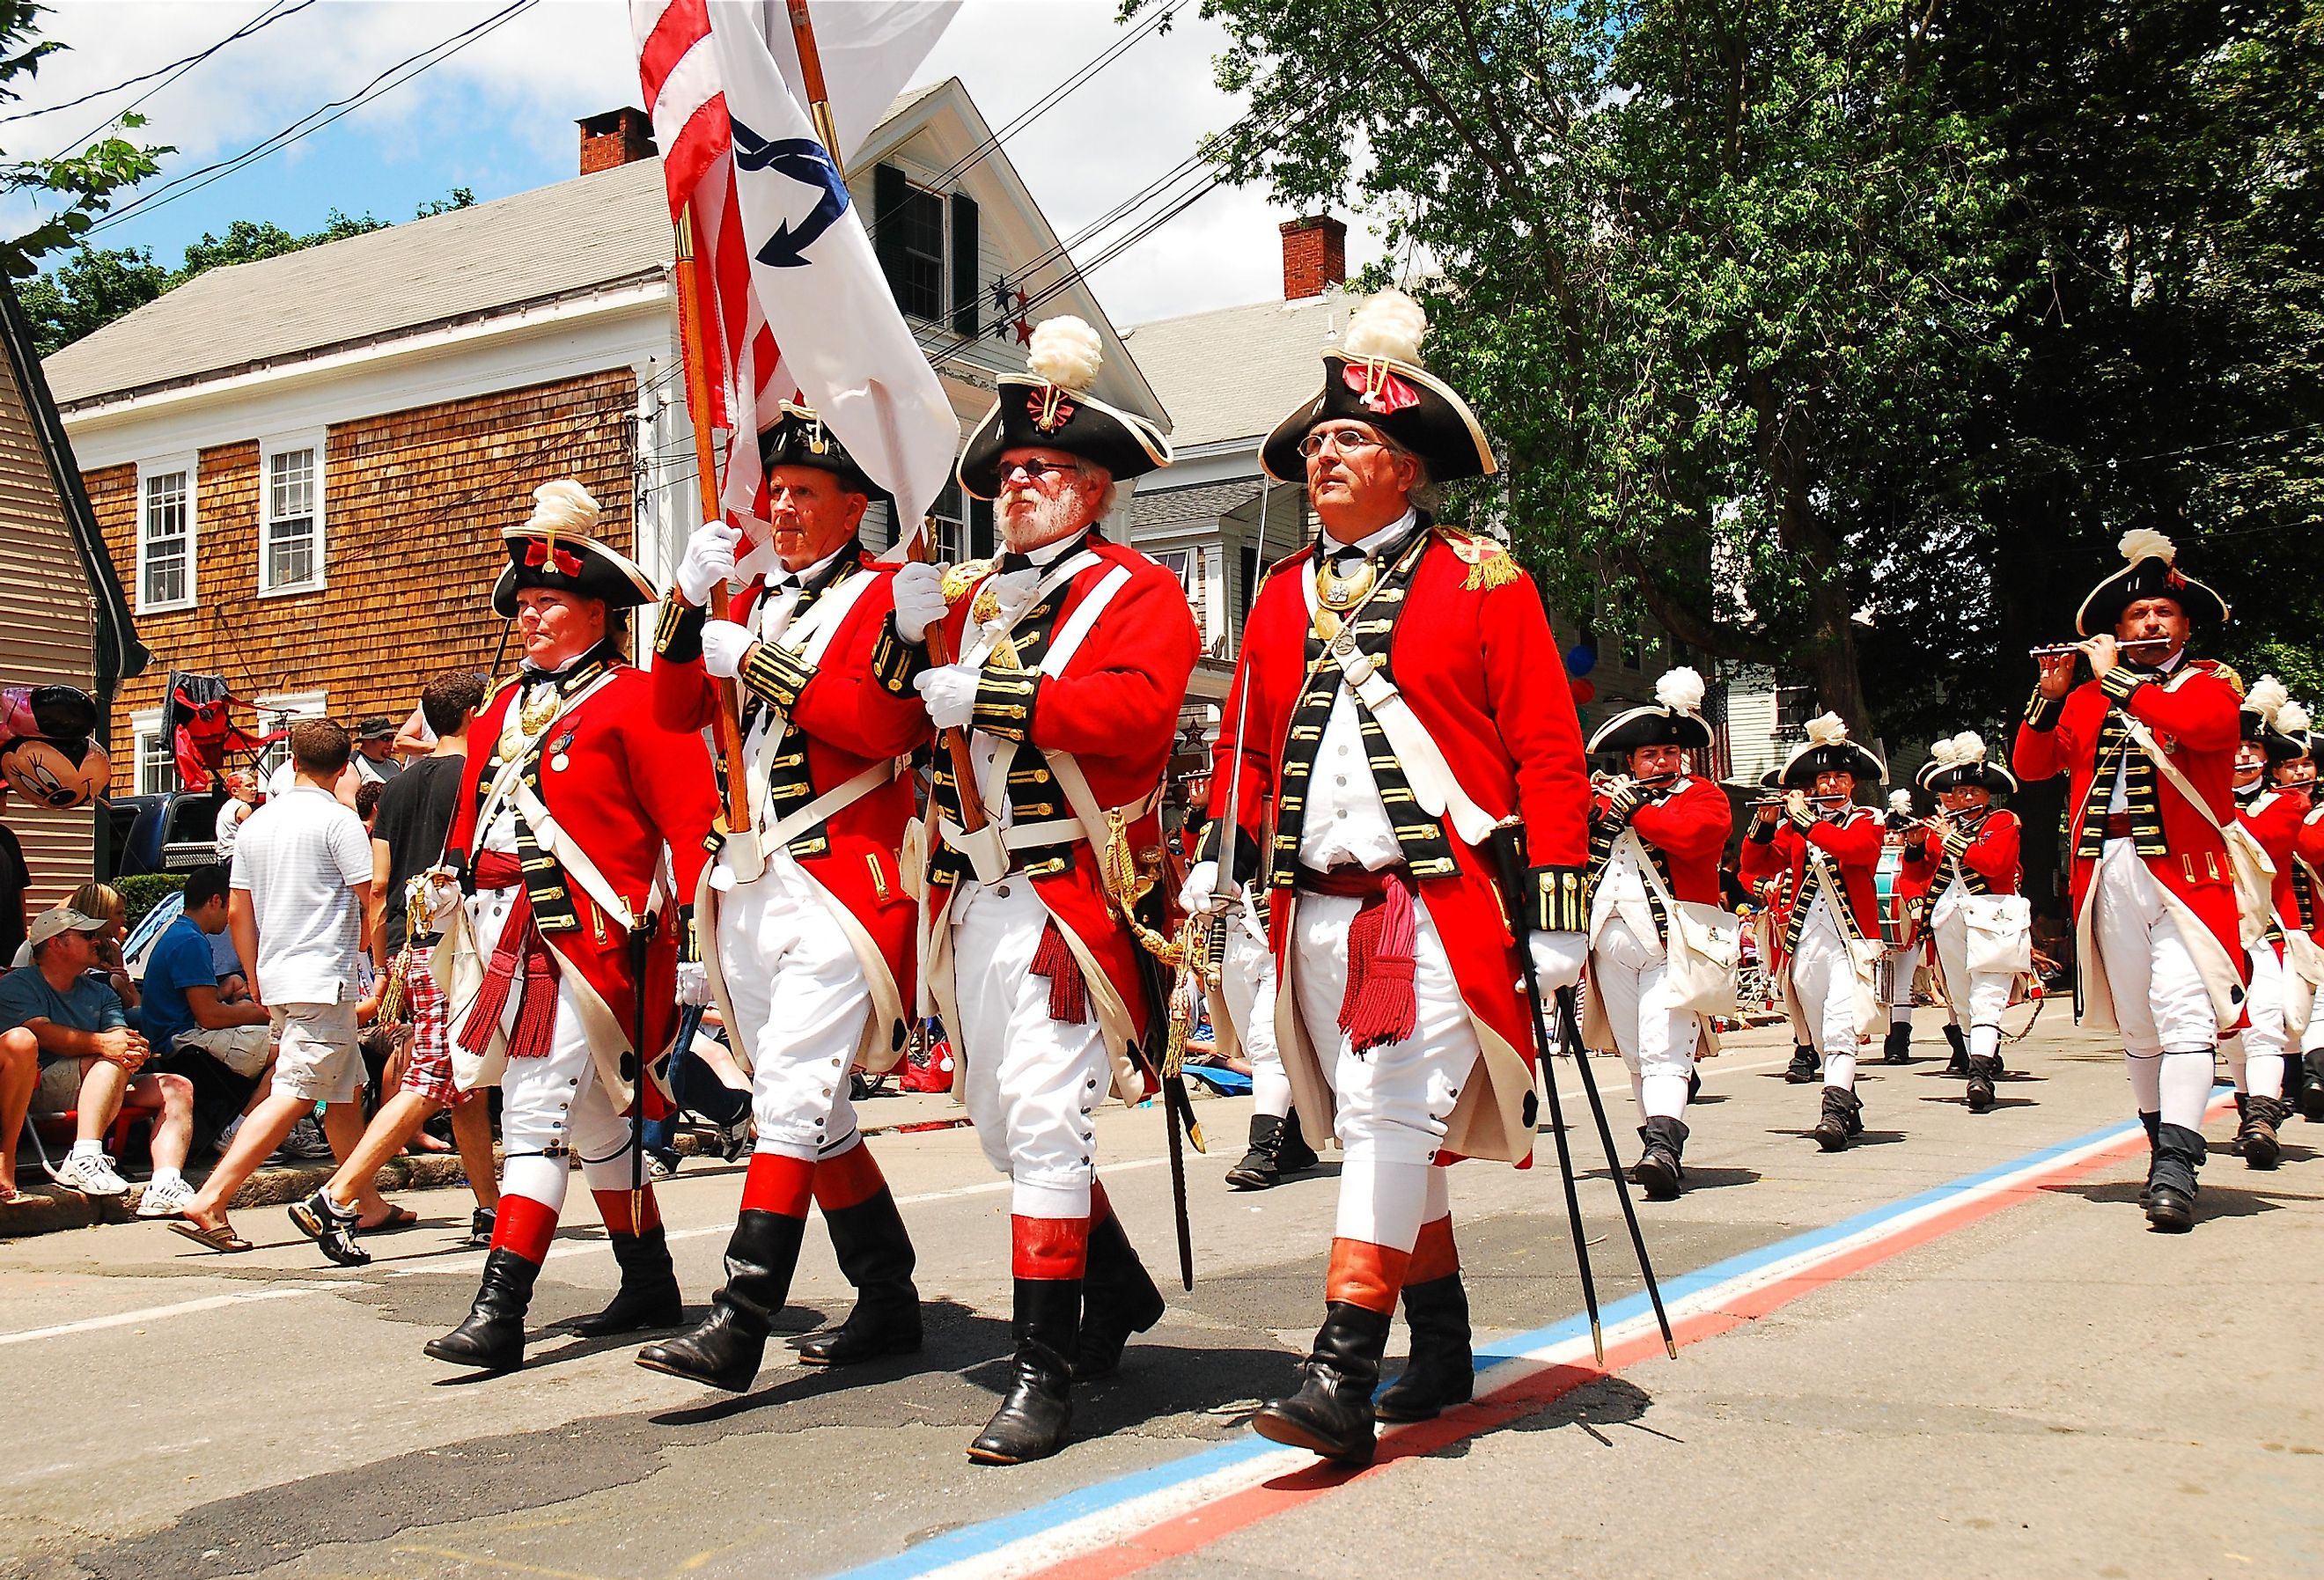 Adults dressed in British red coats from the American Revolution, march in a fourth of July parade in Bristol, Rhode Island. Image credit James Kirkikis via Shutterstock